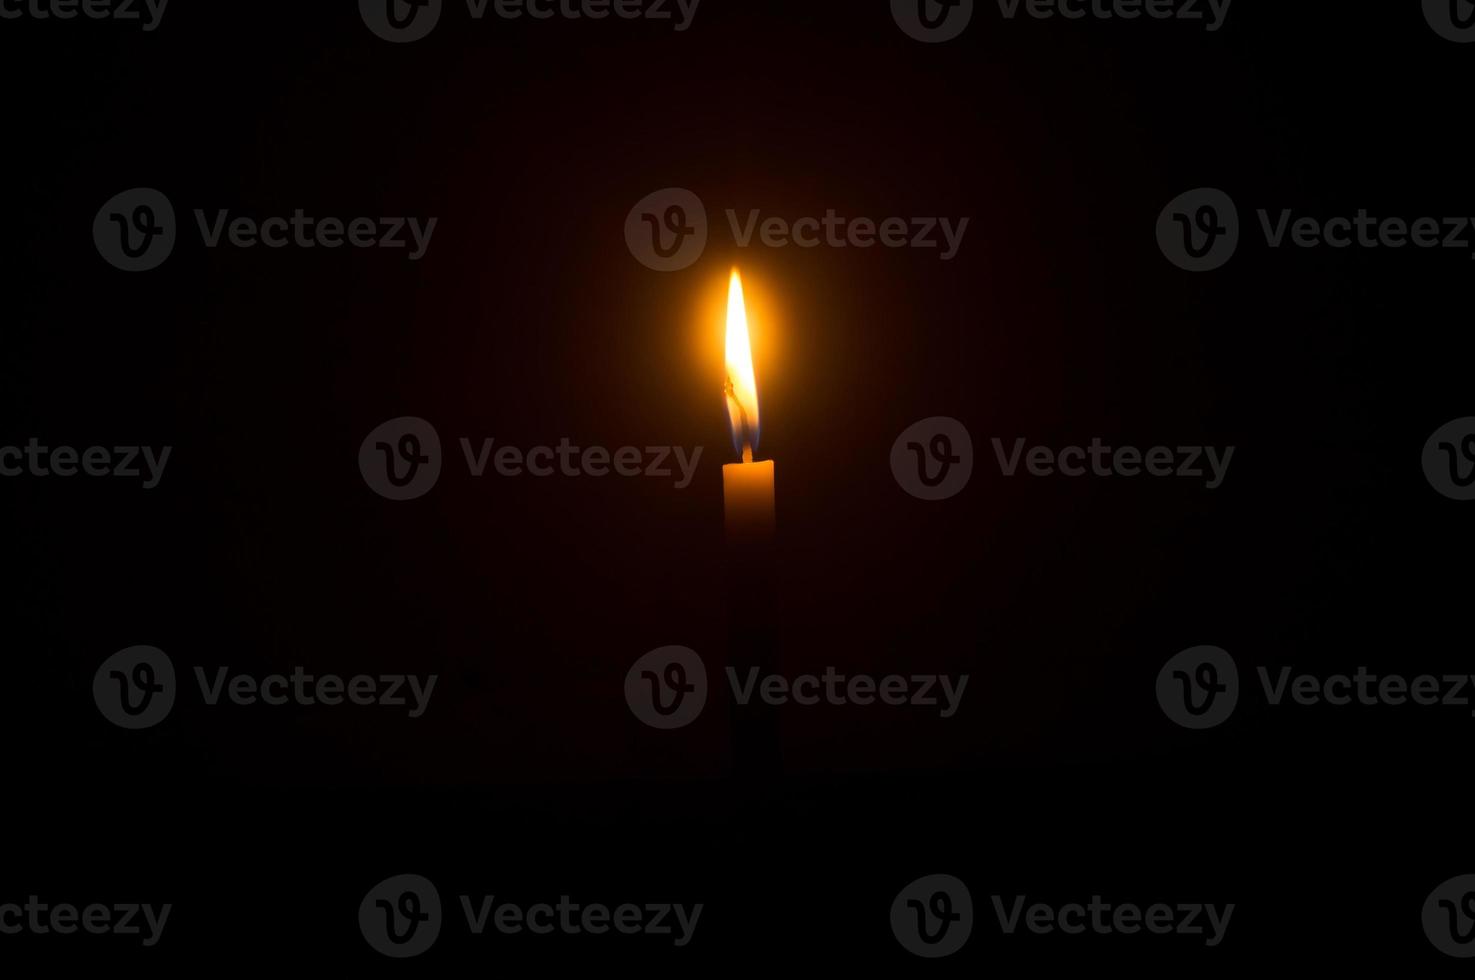 Single burning candle flame or light glowing on an orange candle on black or dark background on table in church for Christmas, funeral or memorial service photo